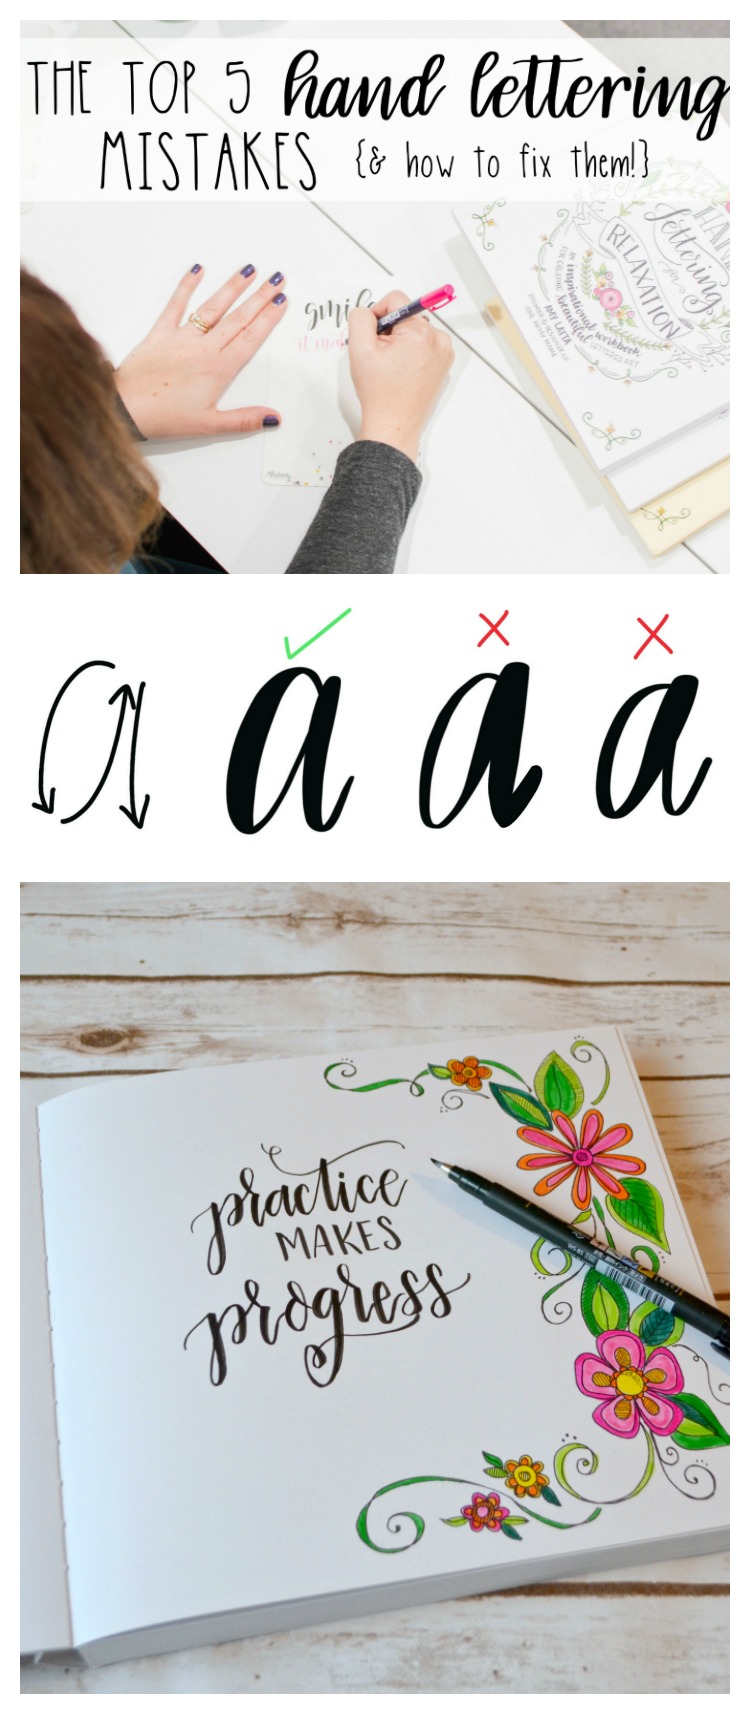 The Top 5 Hand Lettering Mistakes